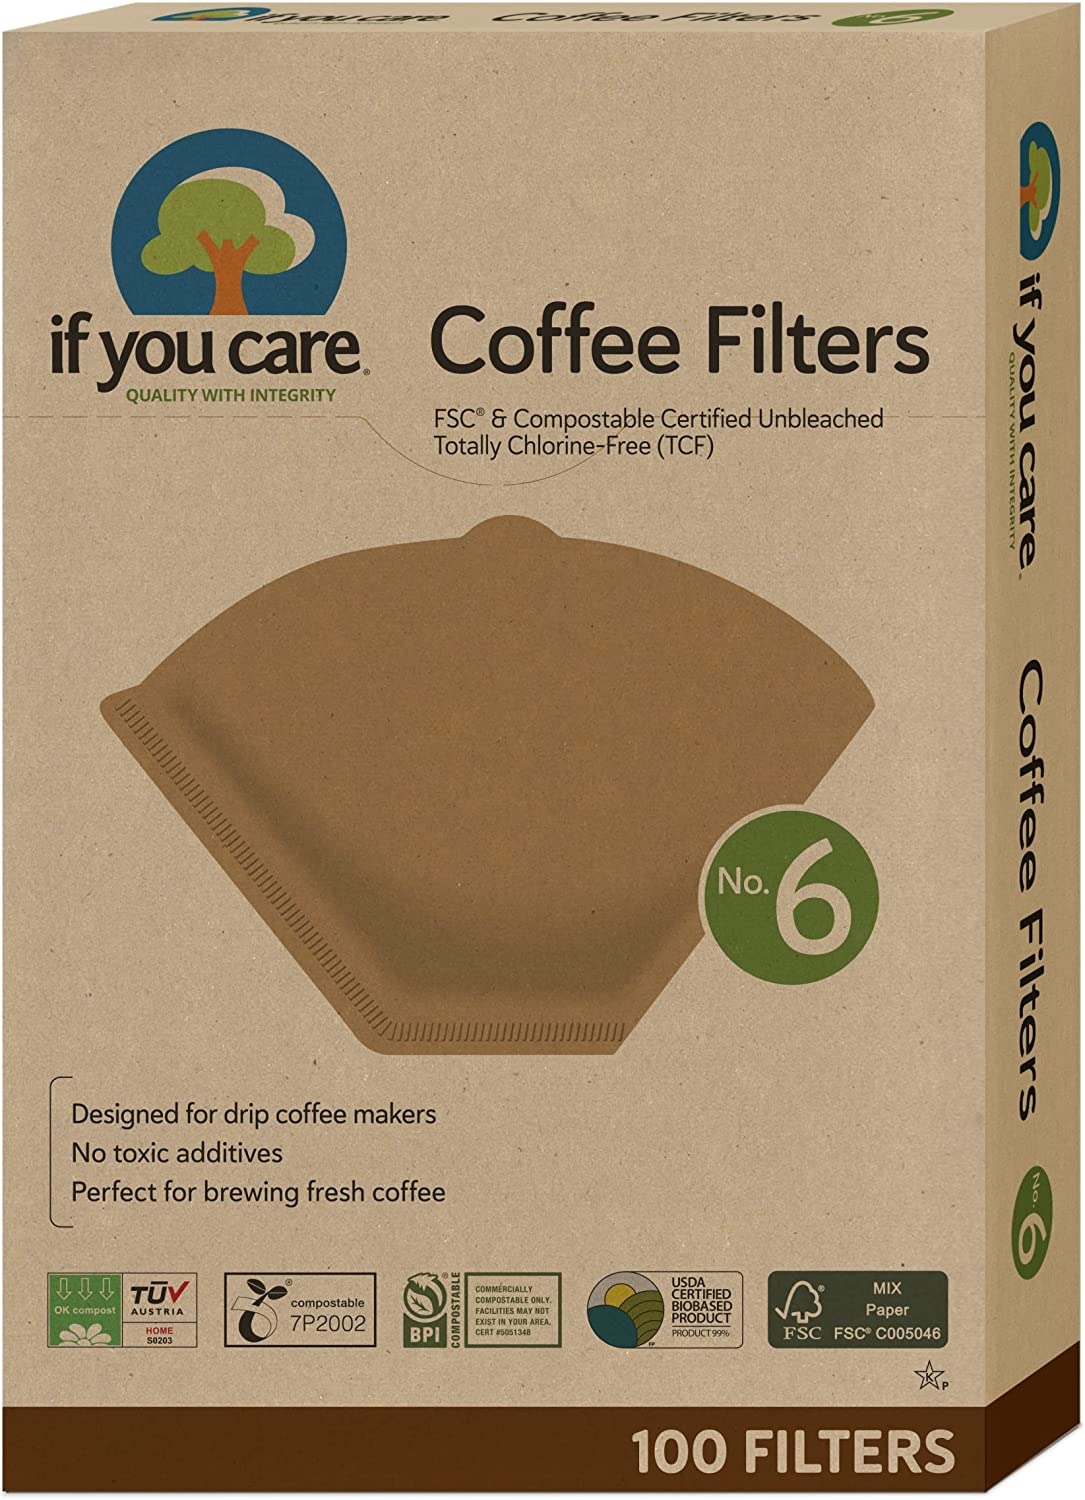 If You Care Unbleached Coffee Filters, 6 – Pack of 100 – Cone Shaped, All Natural, Biodegradable, Compostable, Chlorine Free